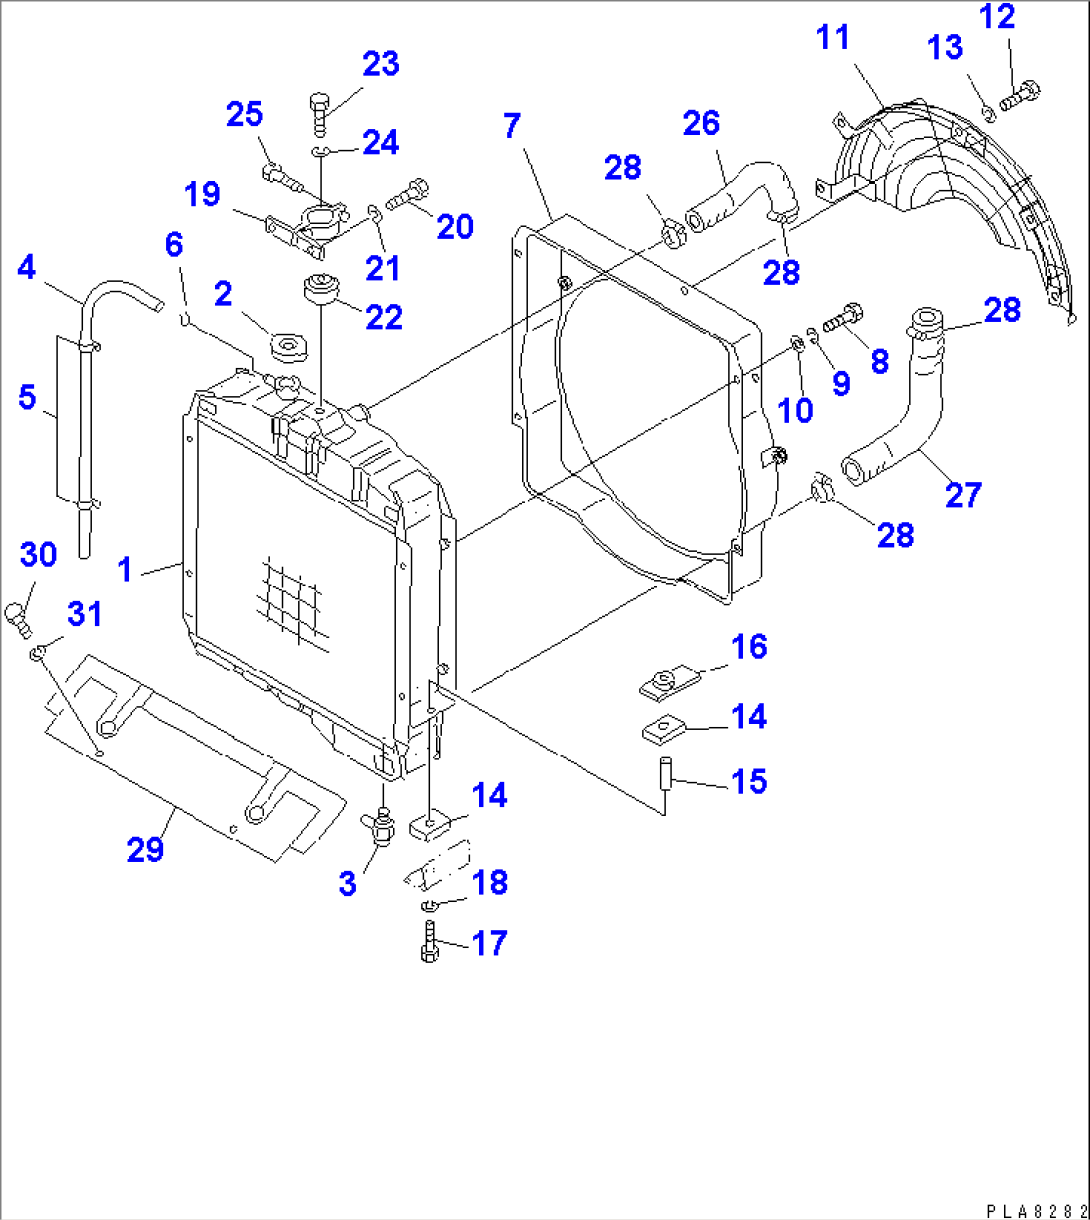 RADIATOR AND PIPING (FOR SHIP